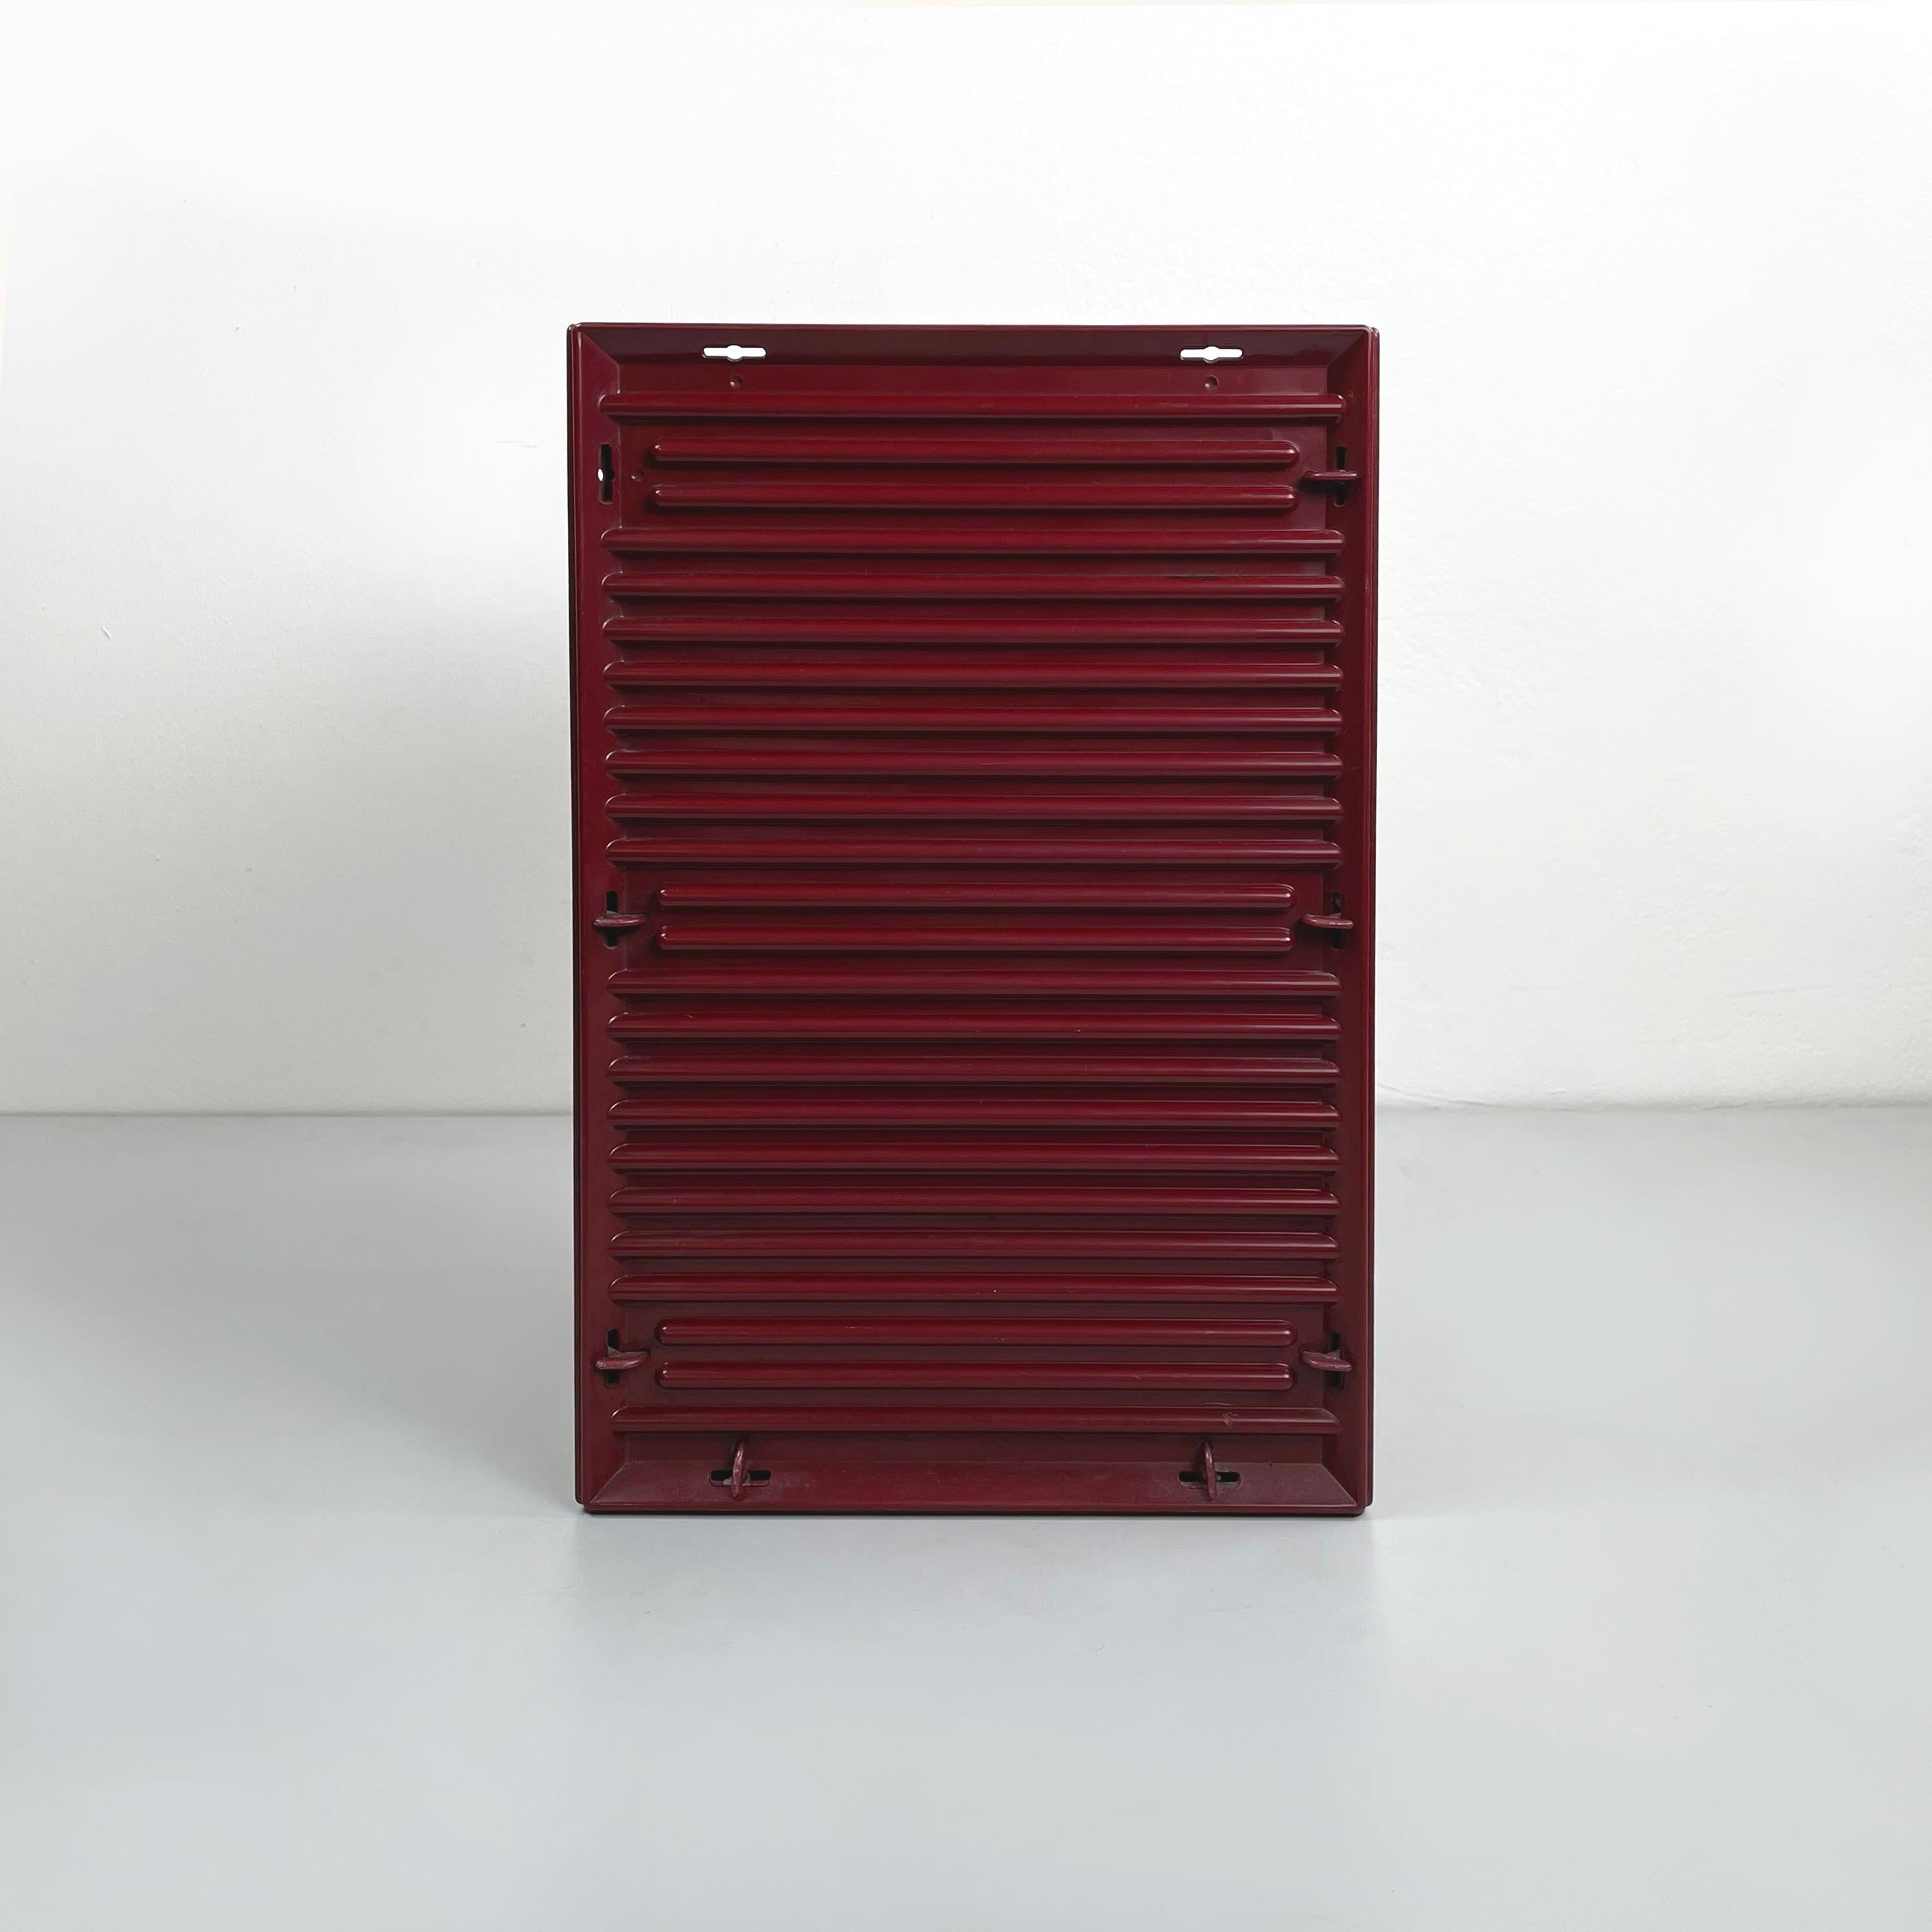 Italian modern Wastepaper basket  by Ettore Sottsass for Olivetti Synthesis, 1970s
Square-based wastepaper basket in burgundy red plastic. The structure is made up of a series of corrugated plastic sheets, fitted together.
Produced by Olivetti